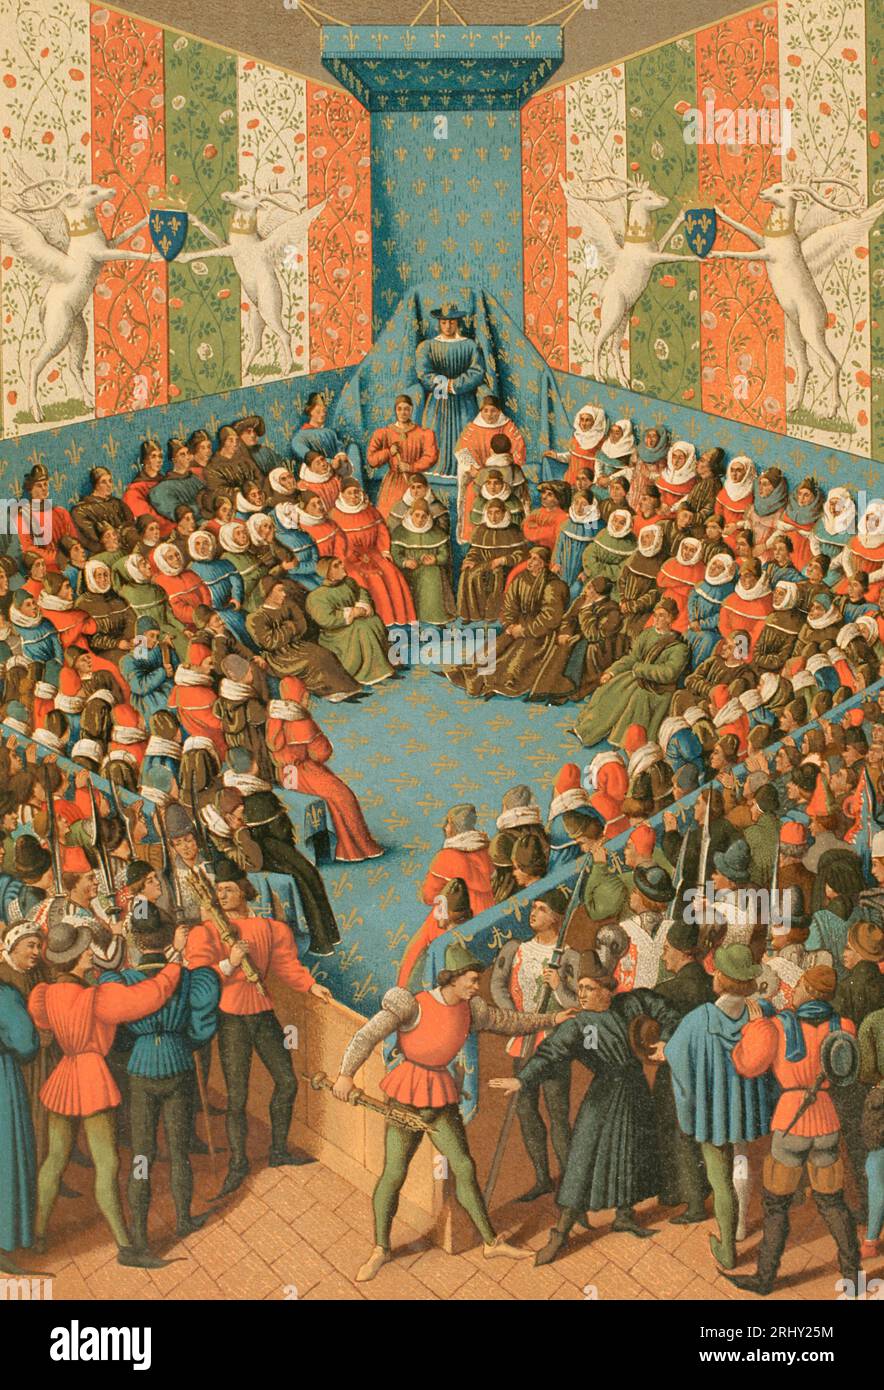 Charles VII (1403-1461). King of France (1422-1461). Charles VII presiding over the judgment of John II of Alençon (1409-1476) at the Château de Vendome in 1458. John II was allied with the English and accused of conspiring against France during the Hundred Years' War. Chromolithography after a 15th-century miniature by Jean Fouquet. 'Vie Militaire et Religieuse au Moyen Age et à l'Epoque de la Renaissance'. Paris, 1877. Stock Photo